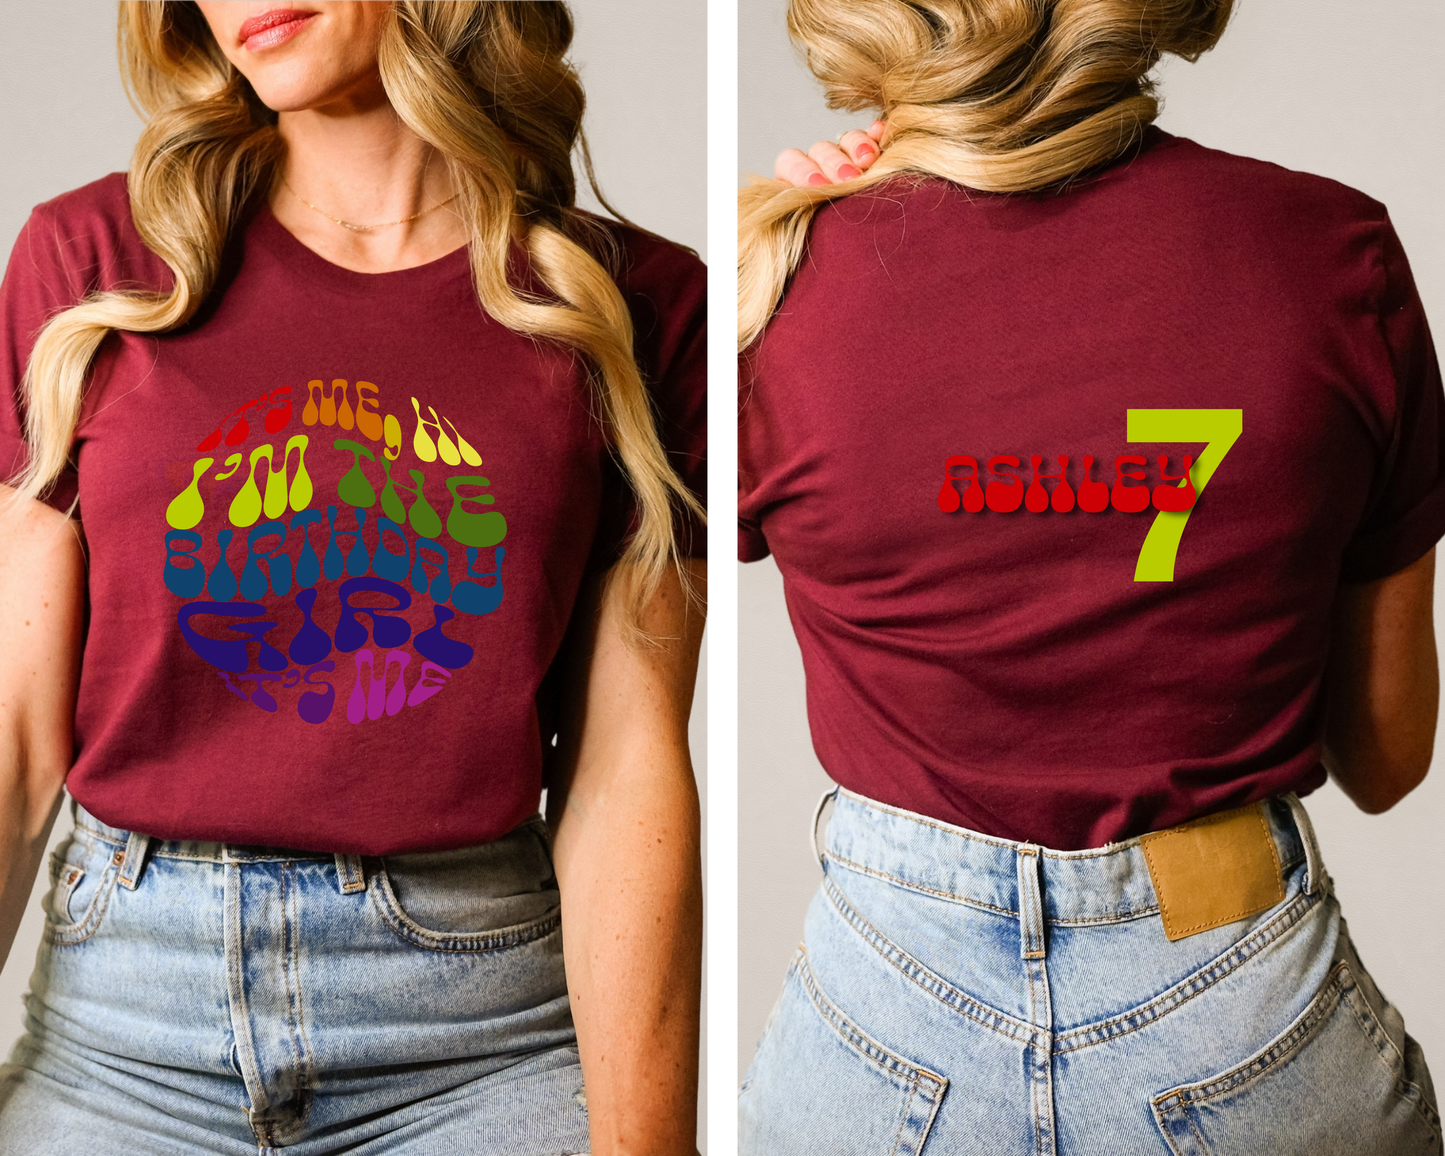 This adorable tee is the perfect outfit for a fun and memorable birthday celebration